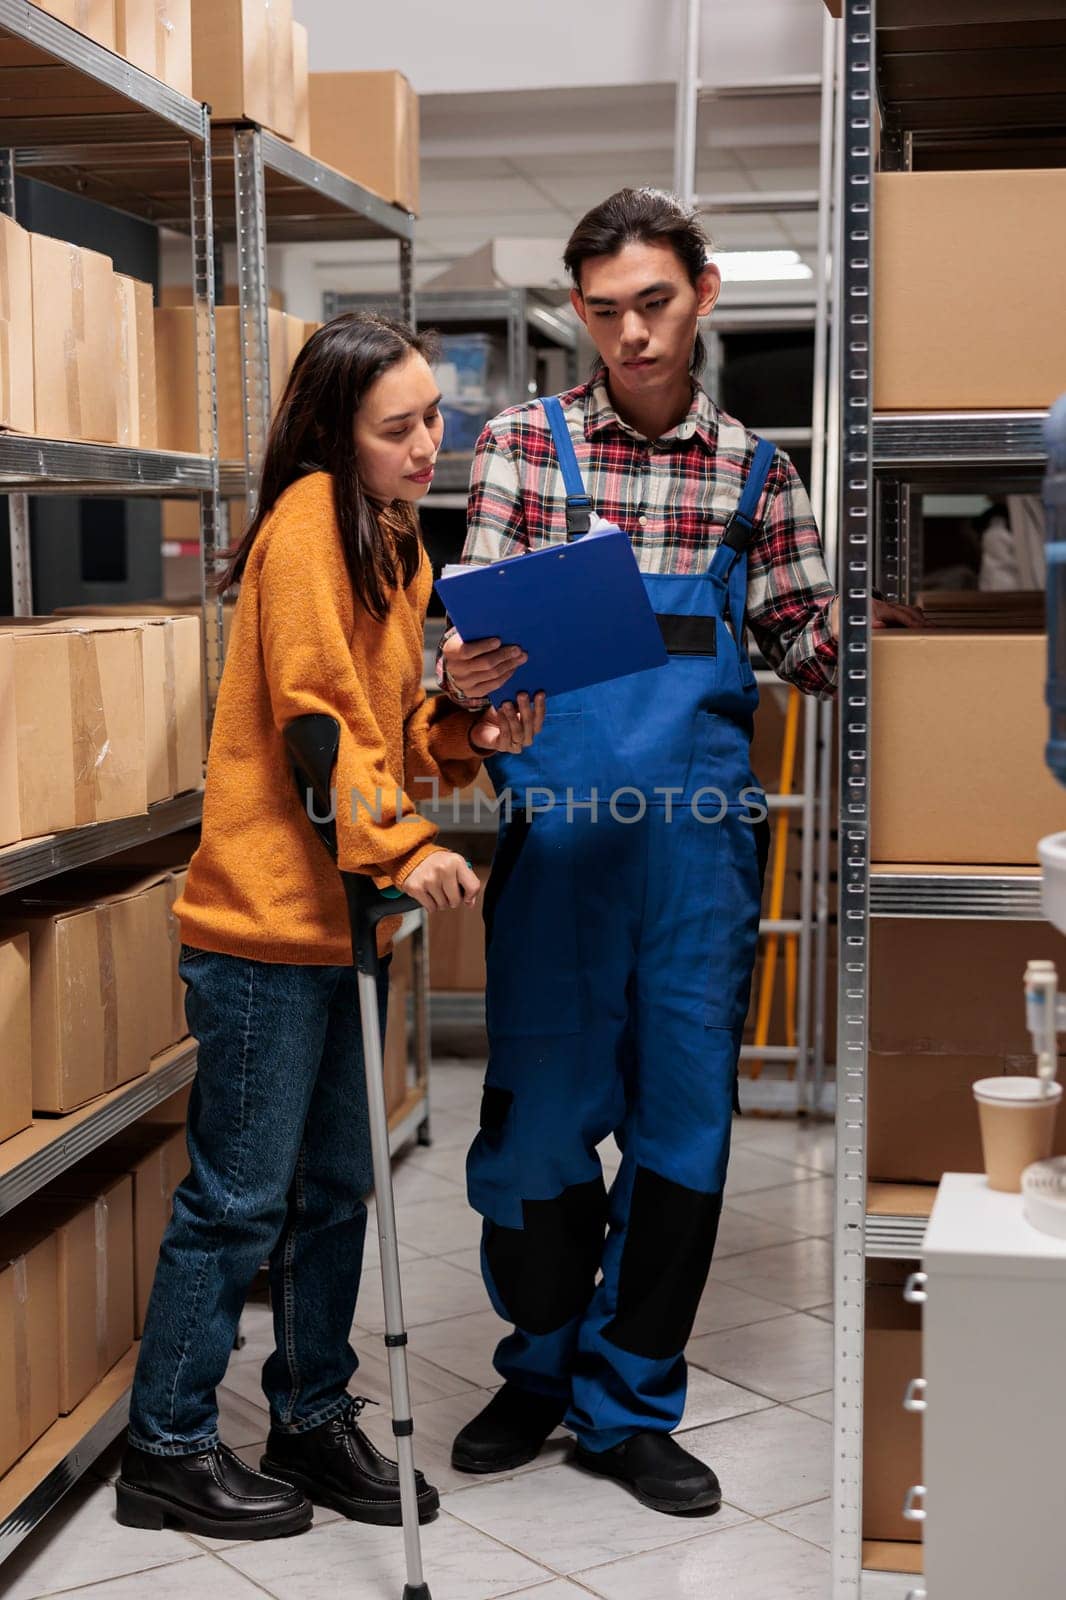 Storehouse asian employees managing inventory optimization in storage room. Warehouse logistics manager on crutches and young man pakcage handler analyzing distribution report on clipboard